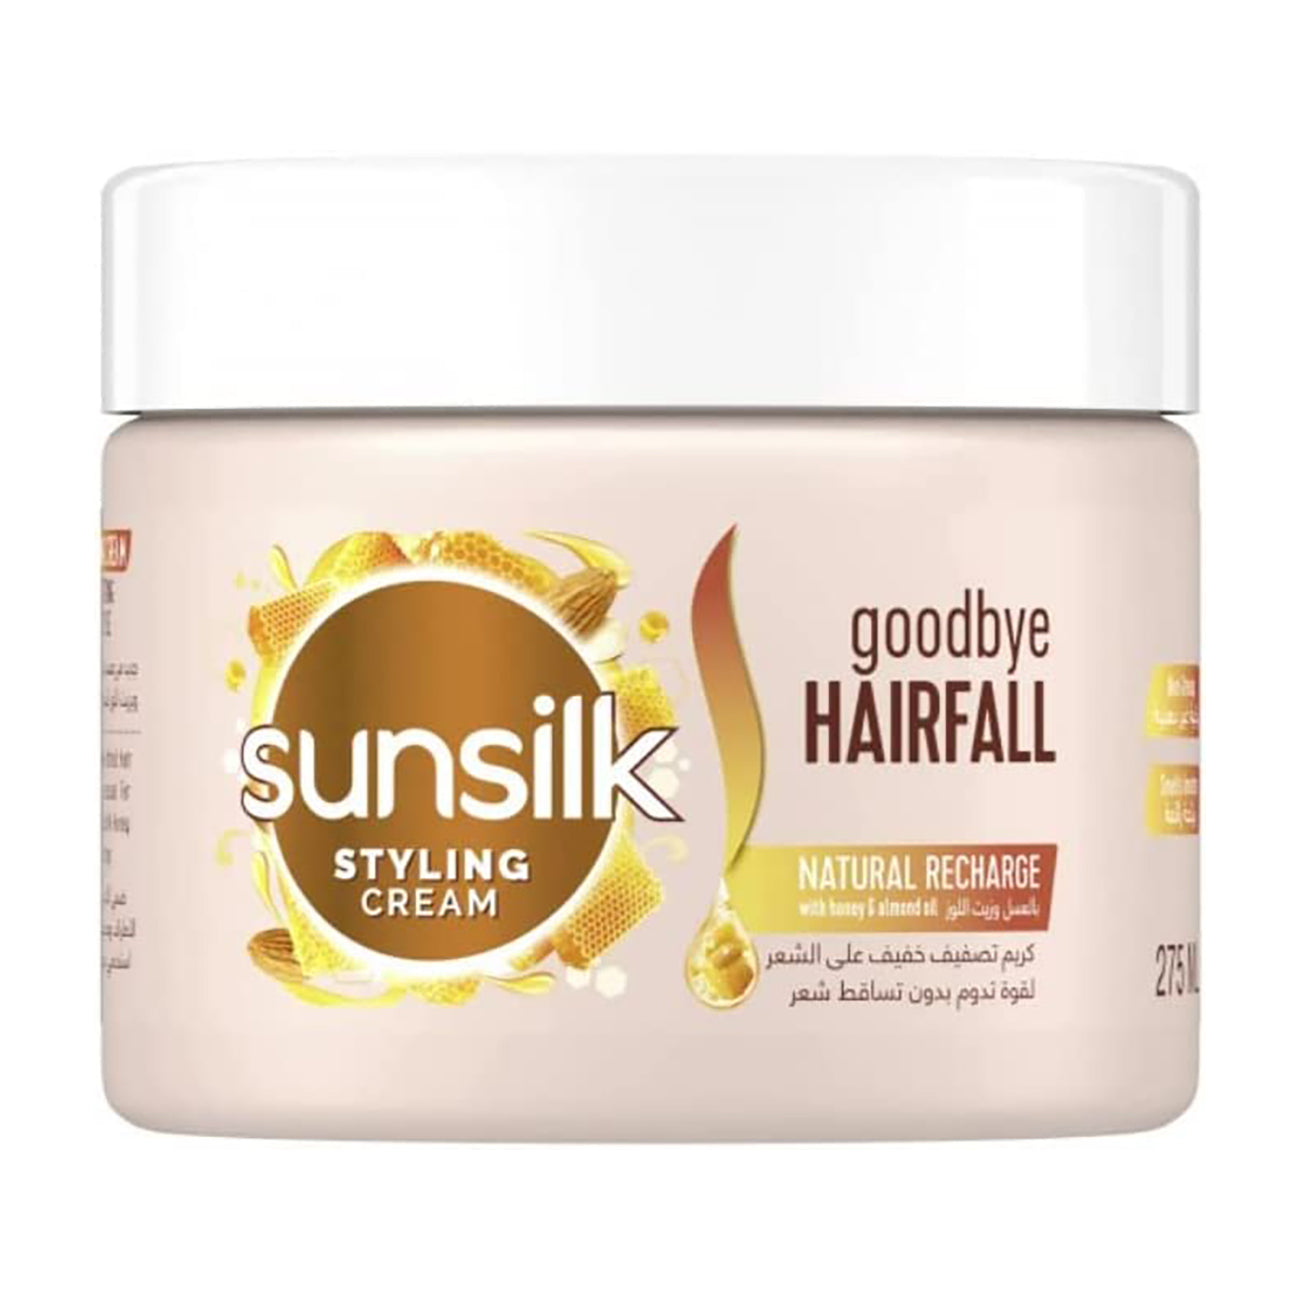 Sunsilk Goodbye Hairfall Natural Recharge Styling Cream With Honey And Almond Oil, 275ml